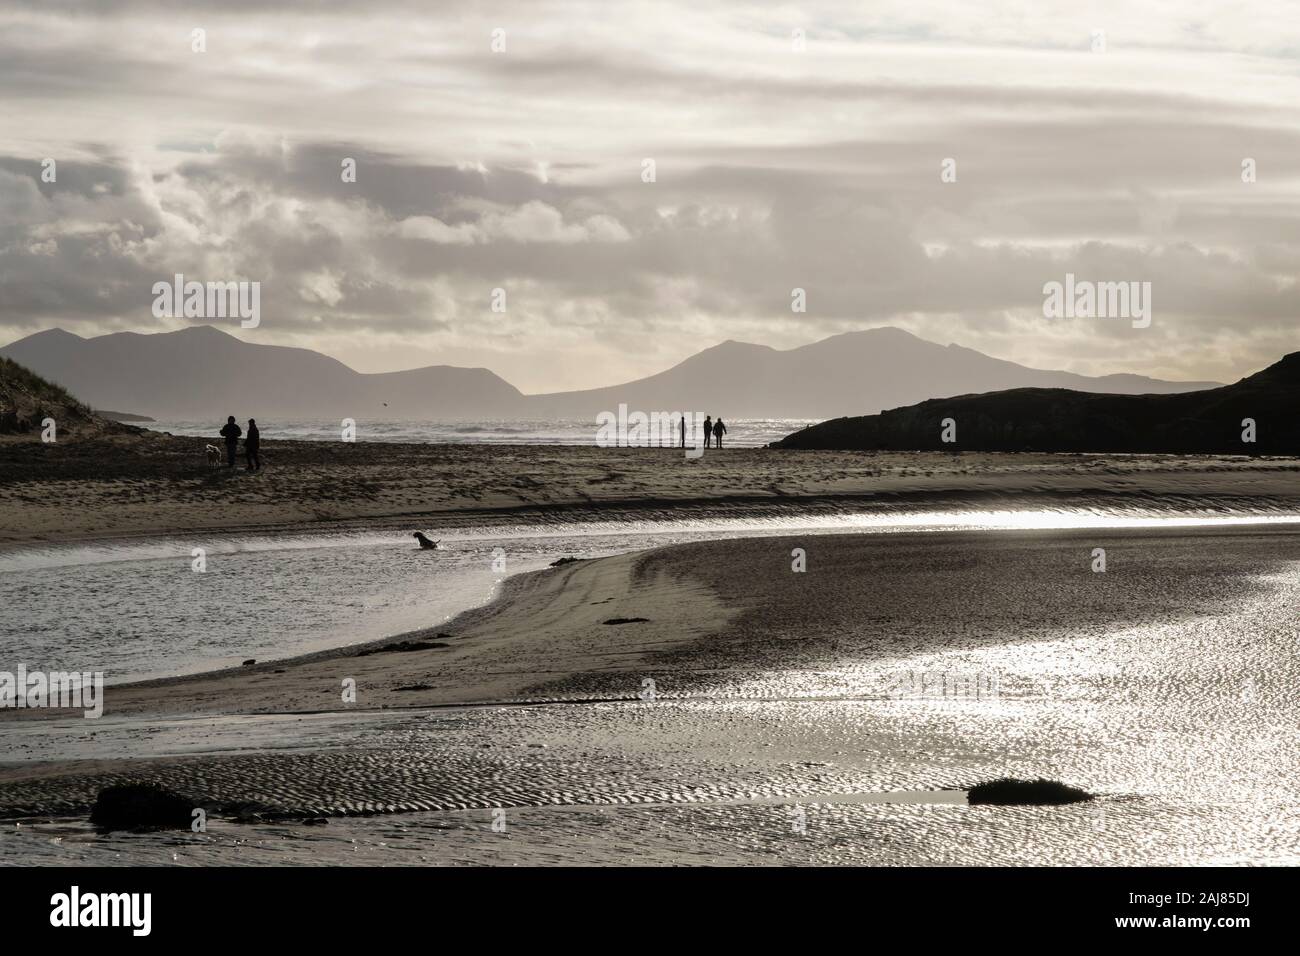 Backlit view across Afon Ffraw river with people walking on Traeth Mawr beach with mountains beyond in winter. Aberffraw Isle of Anglesey Wales UK Stock Photo